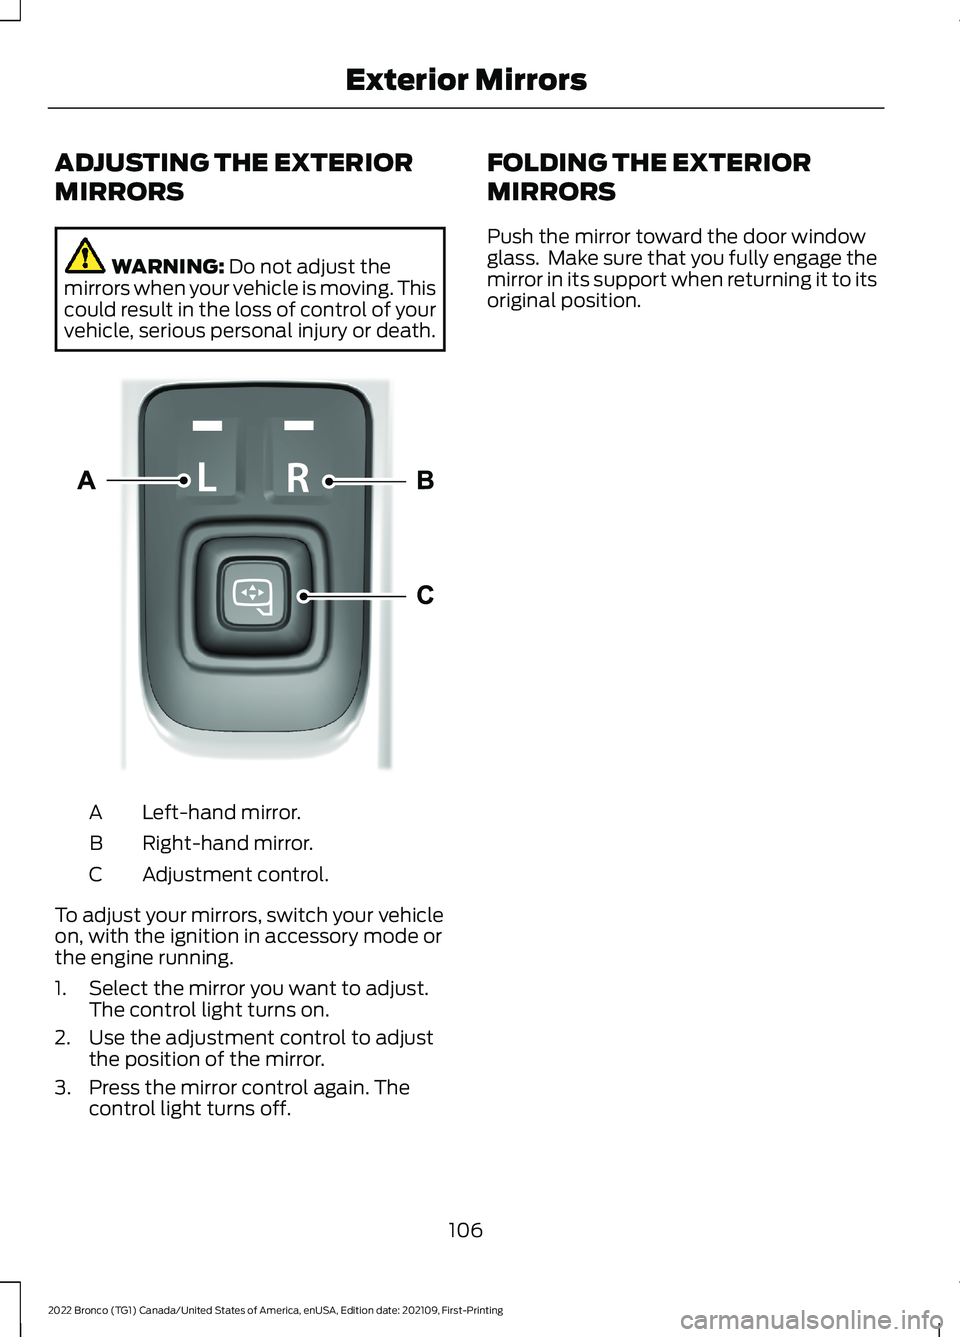 FORD BRONCO 2022  Owners Manual ADJUSTING THE EXTERIOR
MIRRORS
WARNING: Do not adjust themirrors when your vehicle is moving. Thiscould result in the loss of control of yourvehicle, serious personal injury or death.
Left-hand mirror